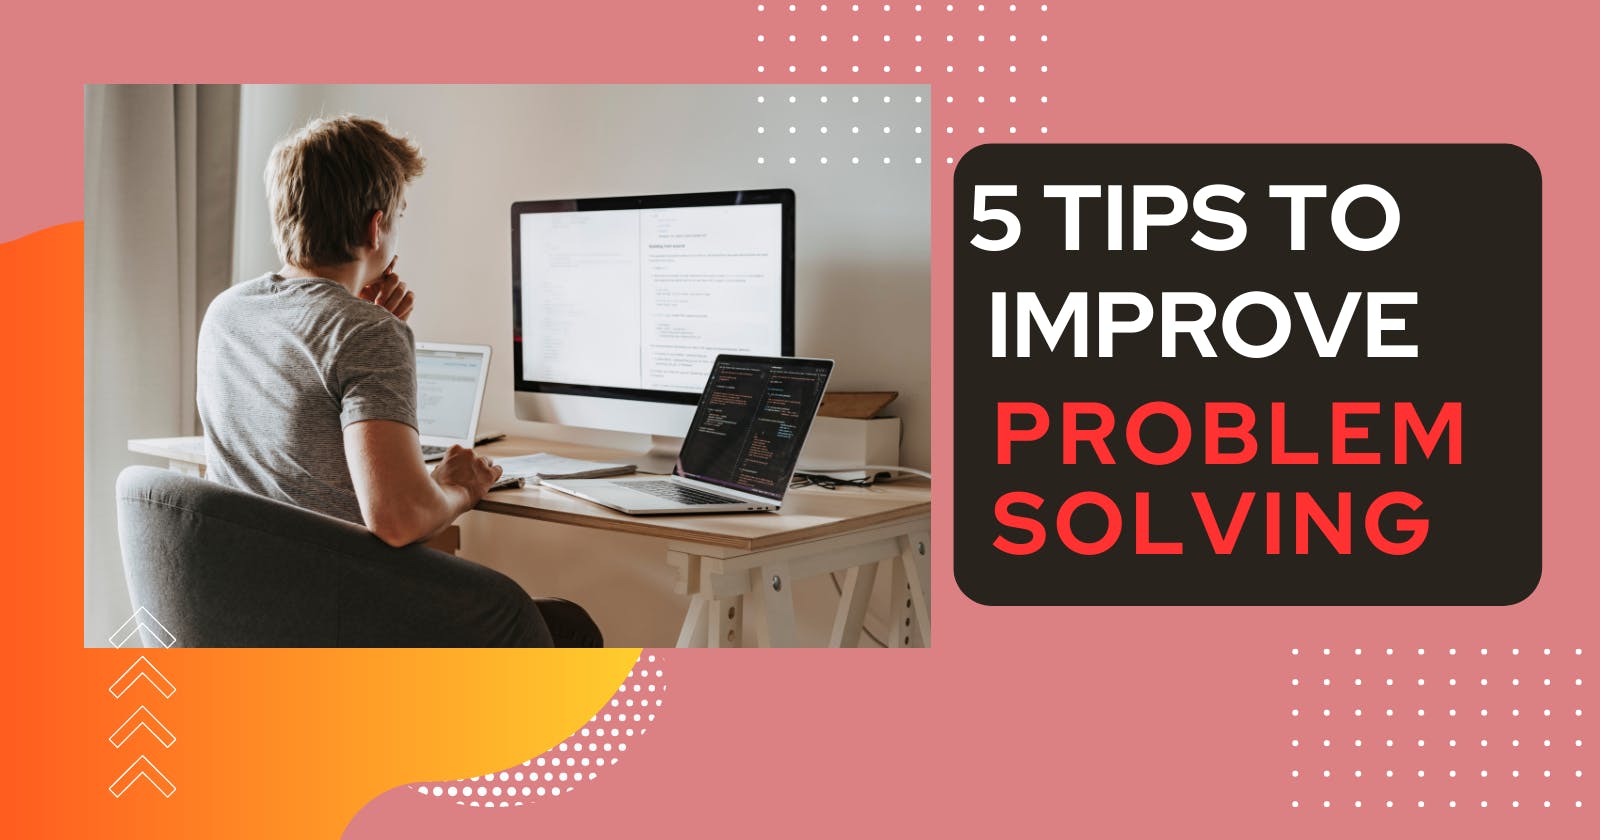 5 Tips For Problem solving in Programming